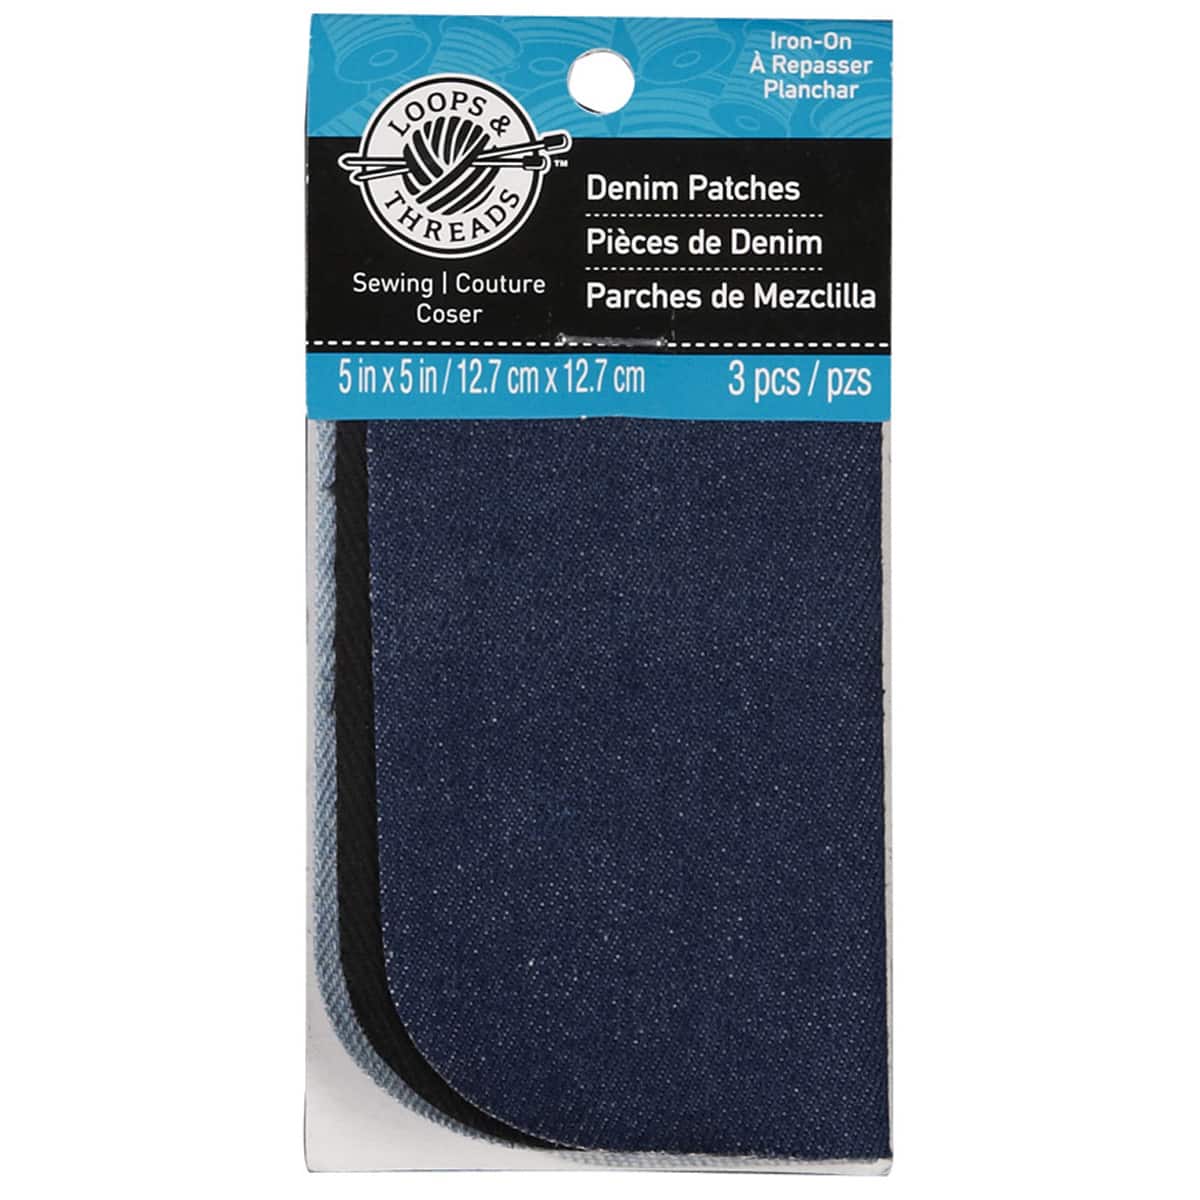  LZYMSZ 36pieces Denim Iron On Patches Set, 32pcs No-Sew Shades  of Blue Black Assorted Denim Repairs Patches for Knee/Jeans/Clothing & 4pcs  Mini Sewing Kit : Arts, Crafts & Sewing